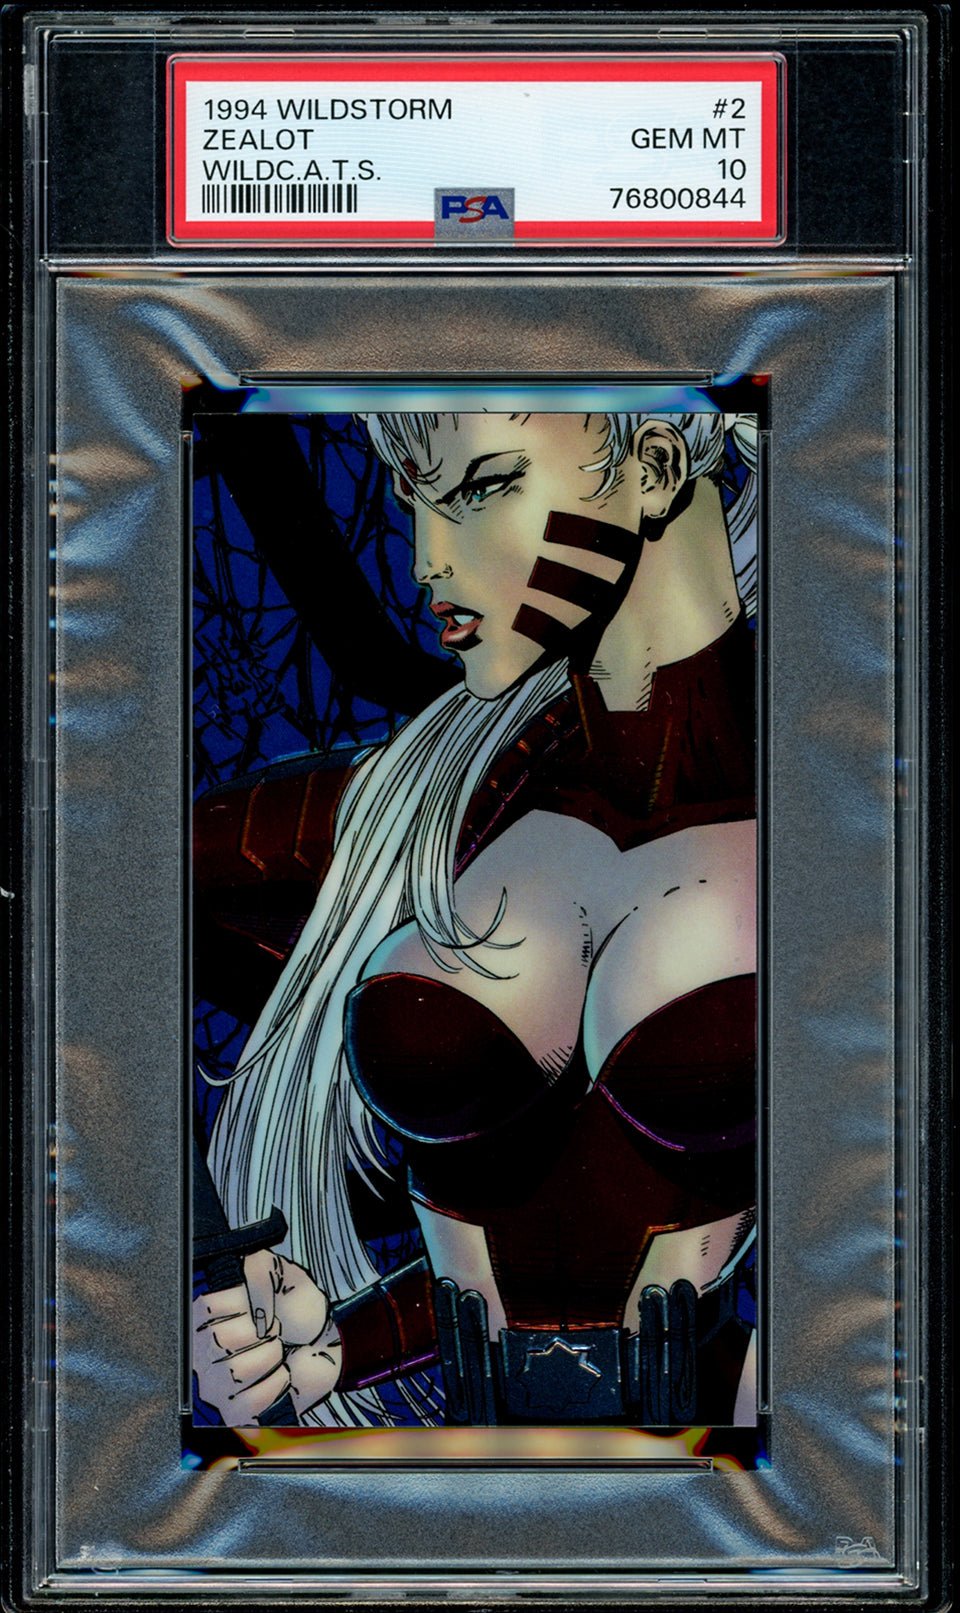 ZEALOT PSA 10 1994 Wildstorm WildC.A.T.S. Widevision #2 WildC.A.T.S. Base Graded Cards - Hobby Gems